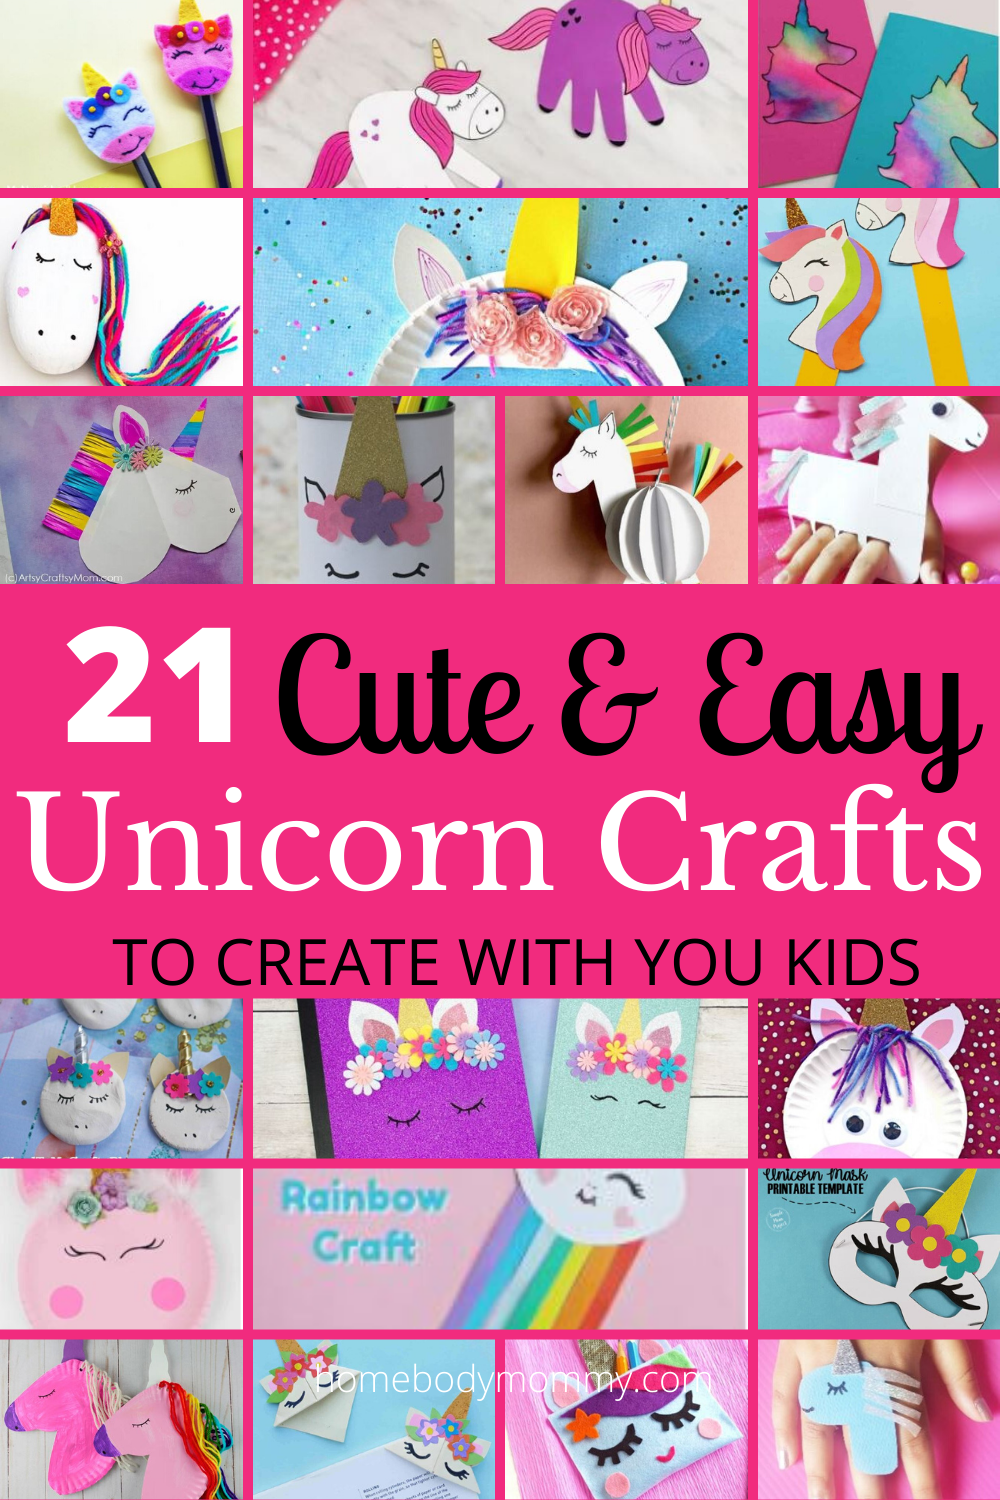 21 Adorable DIY Unicorn Crafts for Kids to Make - Homebody Mommy -   diy Easy unicorn